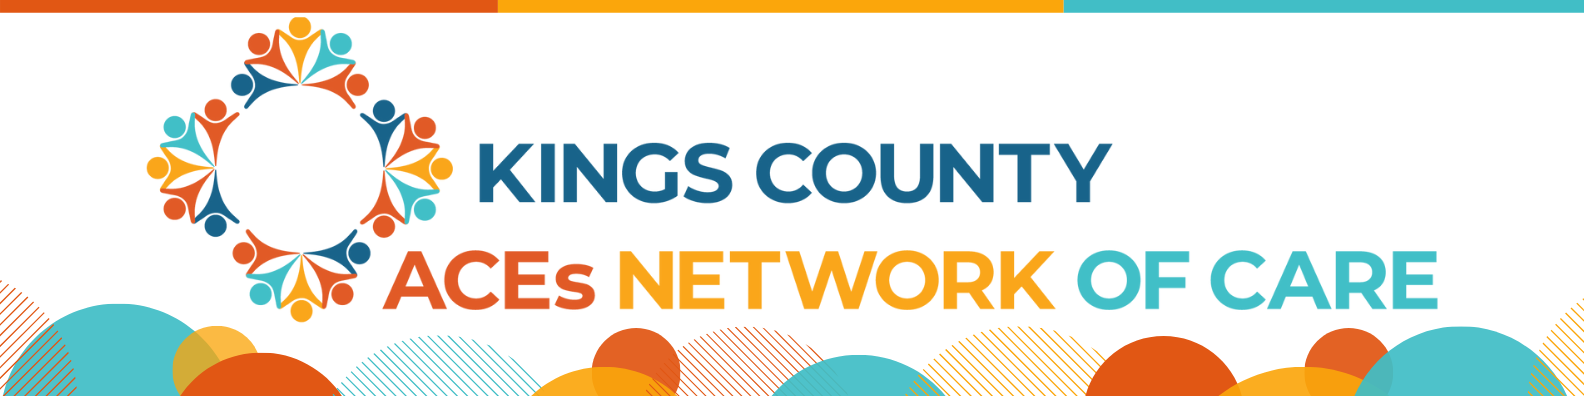 Kings County ACEs Network of Care (CA)